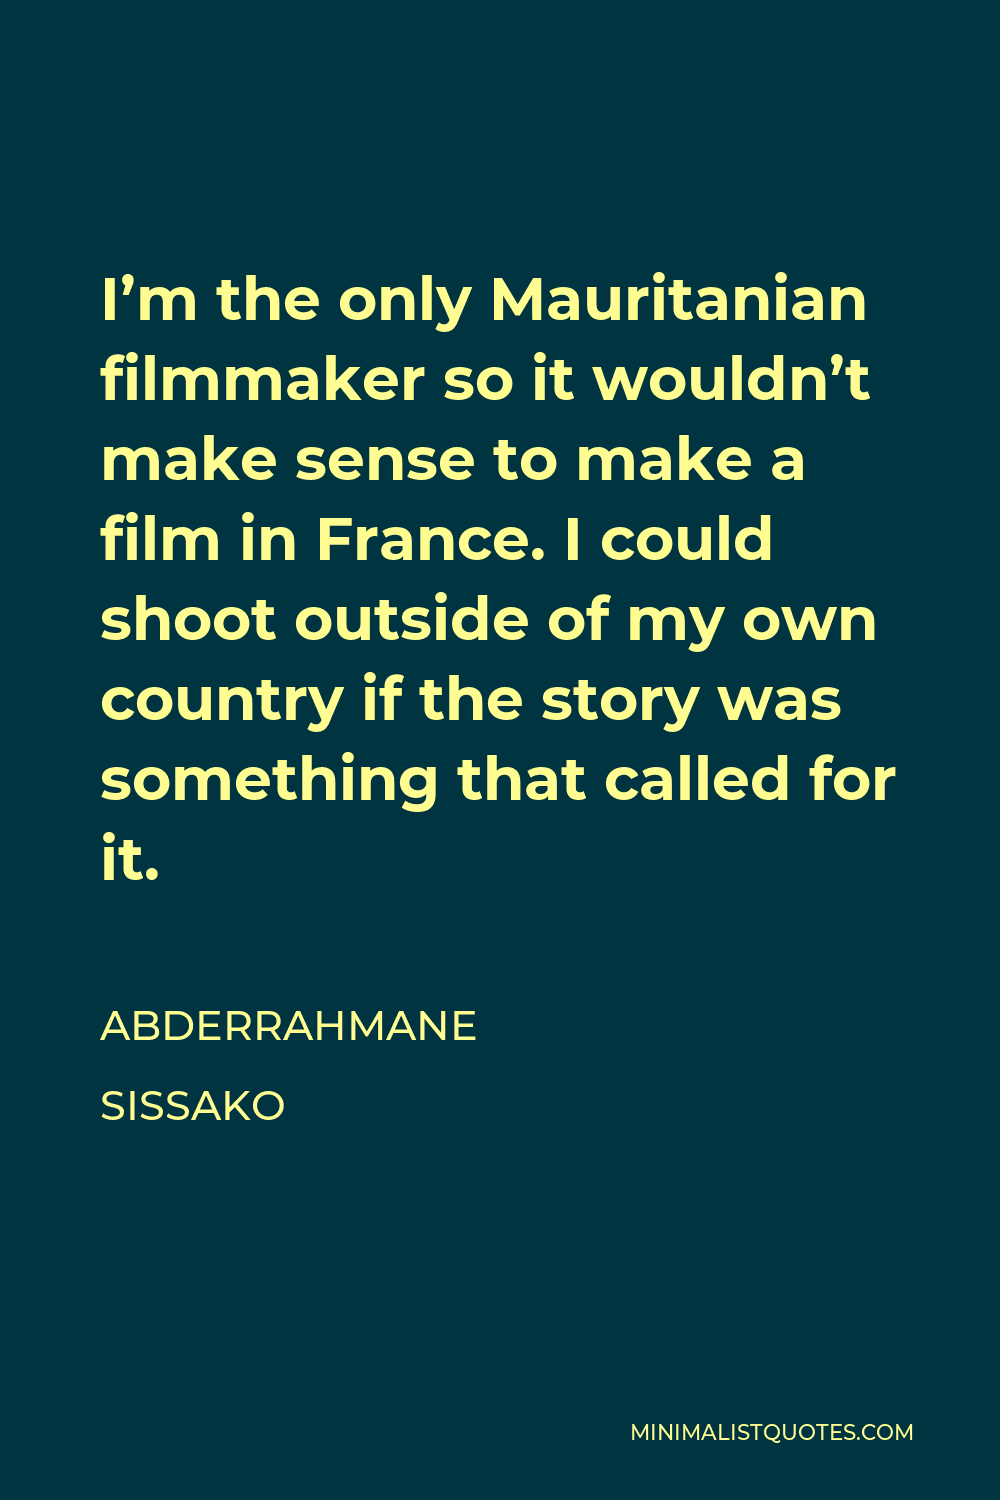 Abderrahmane Sissako Quote - I’m the only Mauritanian filmmaker so it wouldn’t make sense to make a film in France. I could shoot outside of my own country if the story was something that called for it.